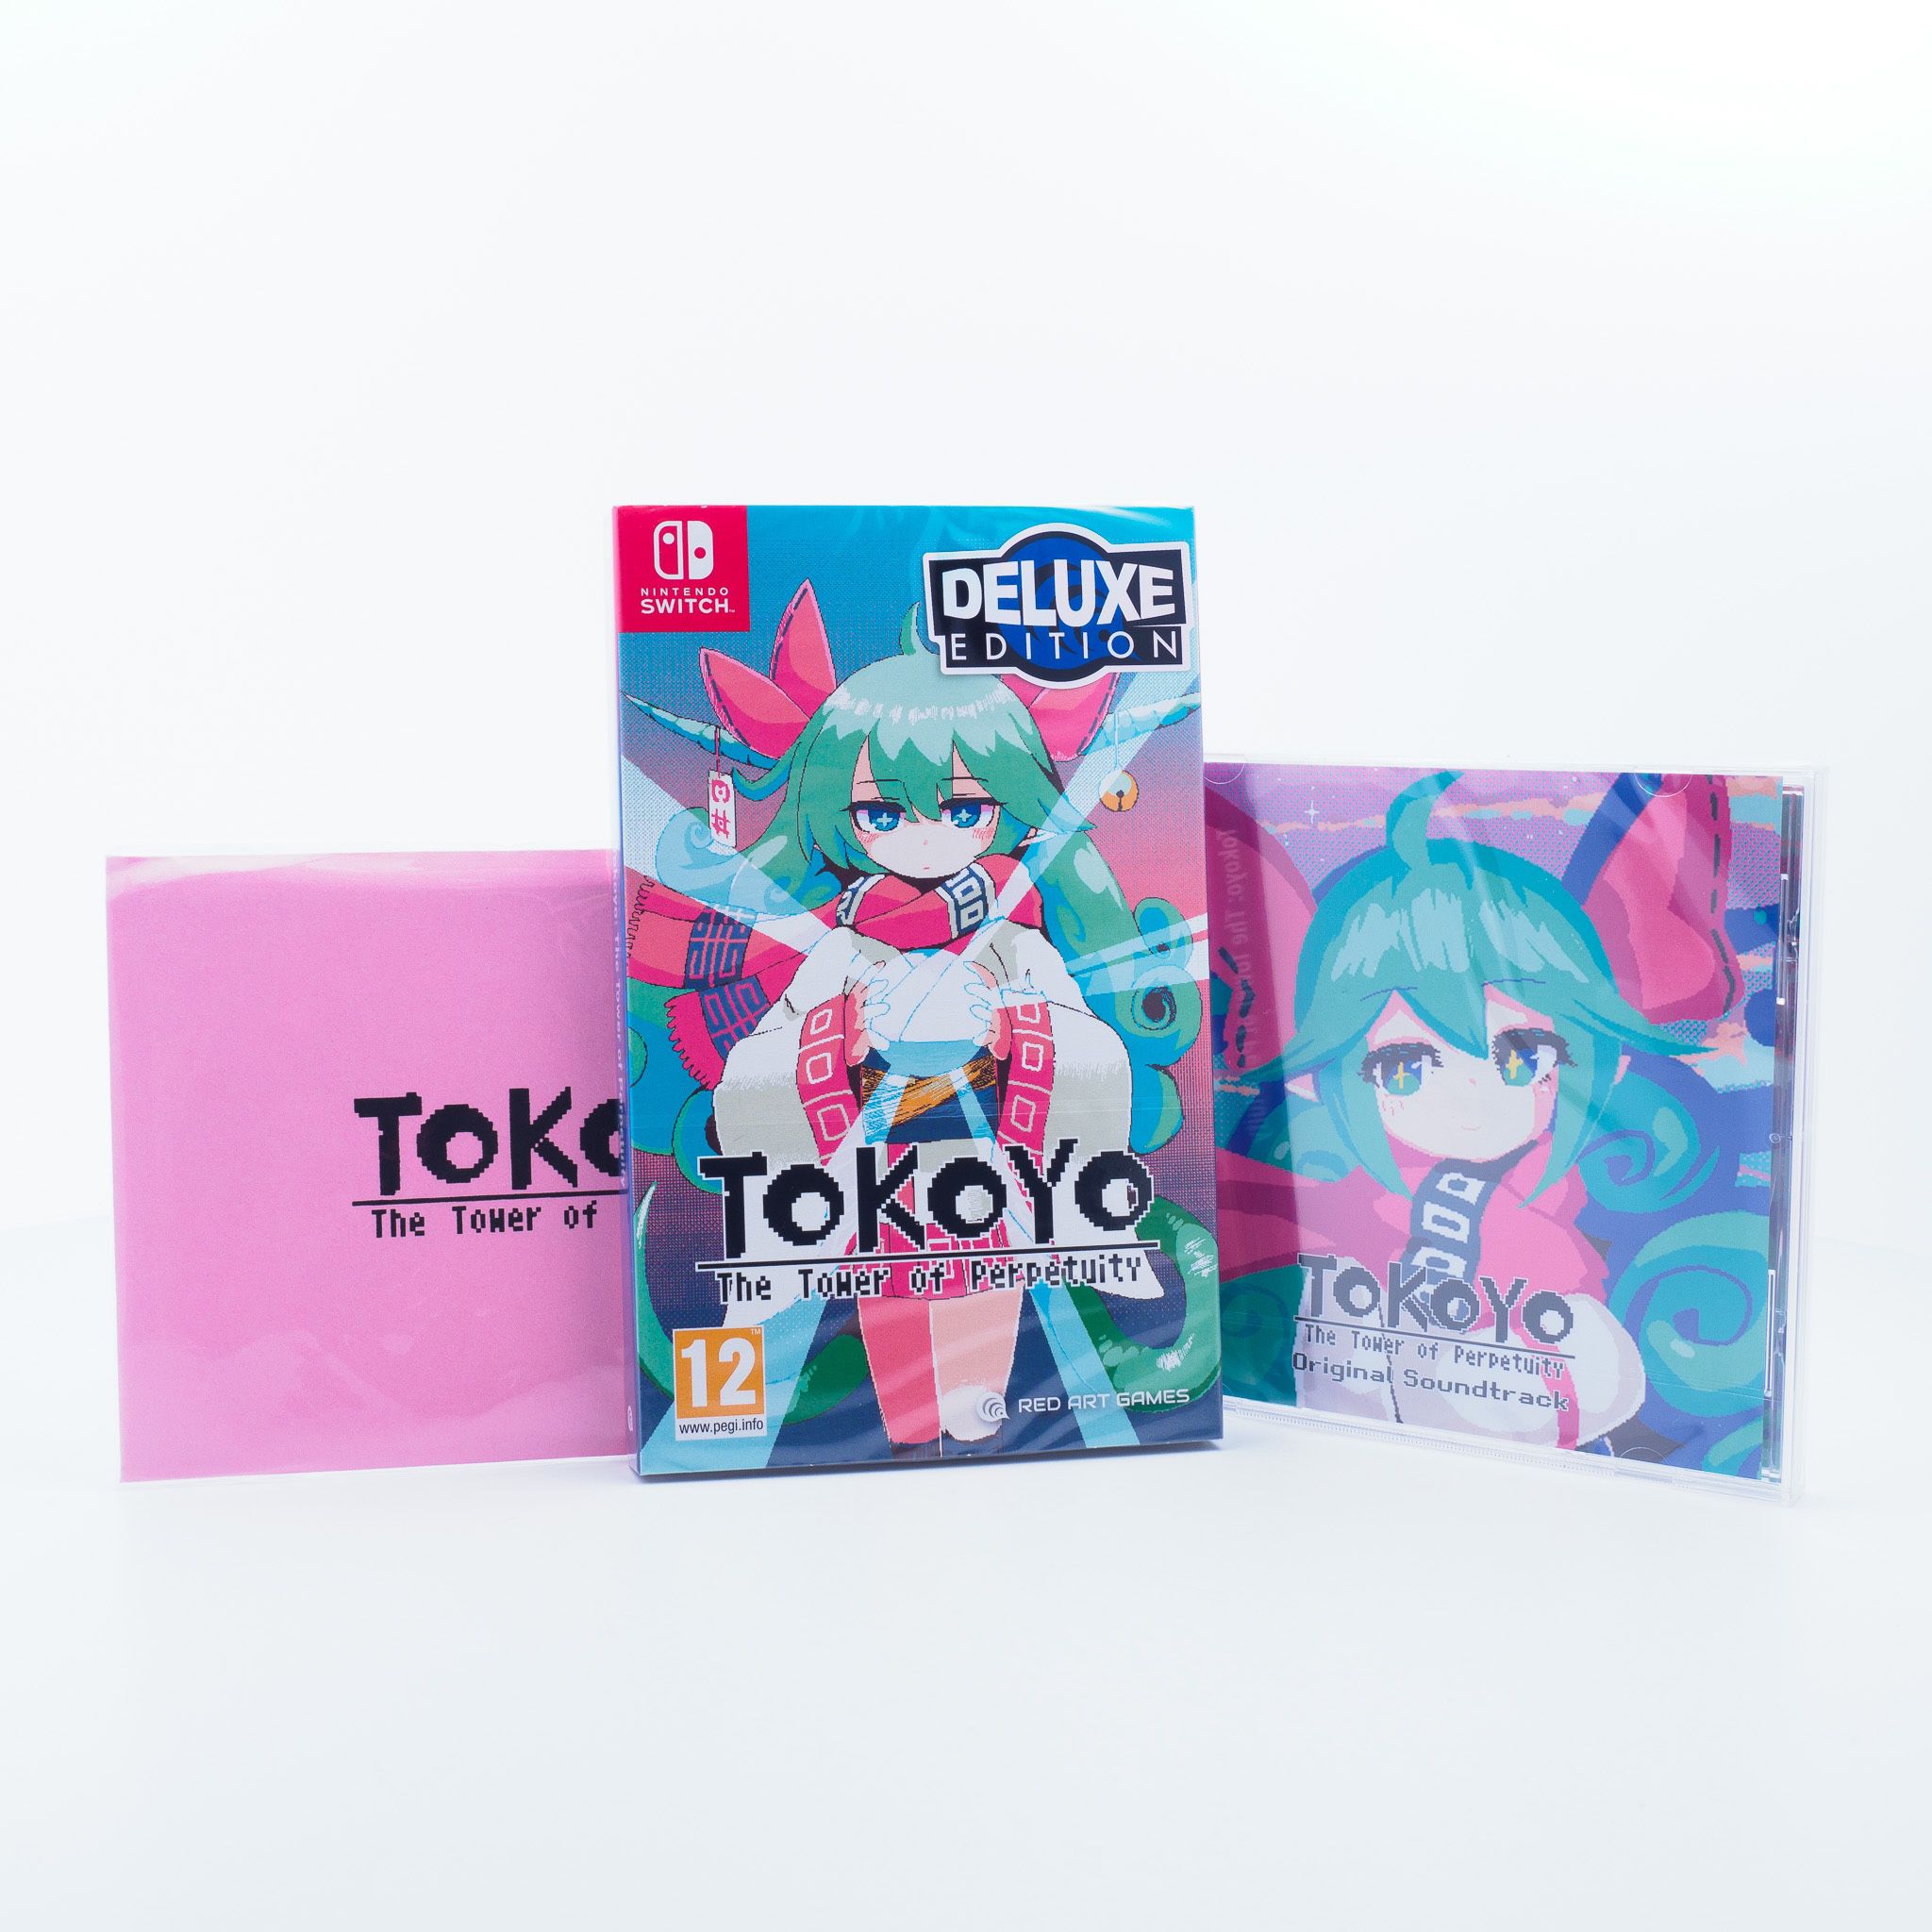 Tokoyo the Tower of Perpetuity Deluxe Edition for Nintendo Switch